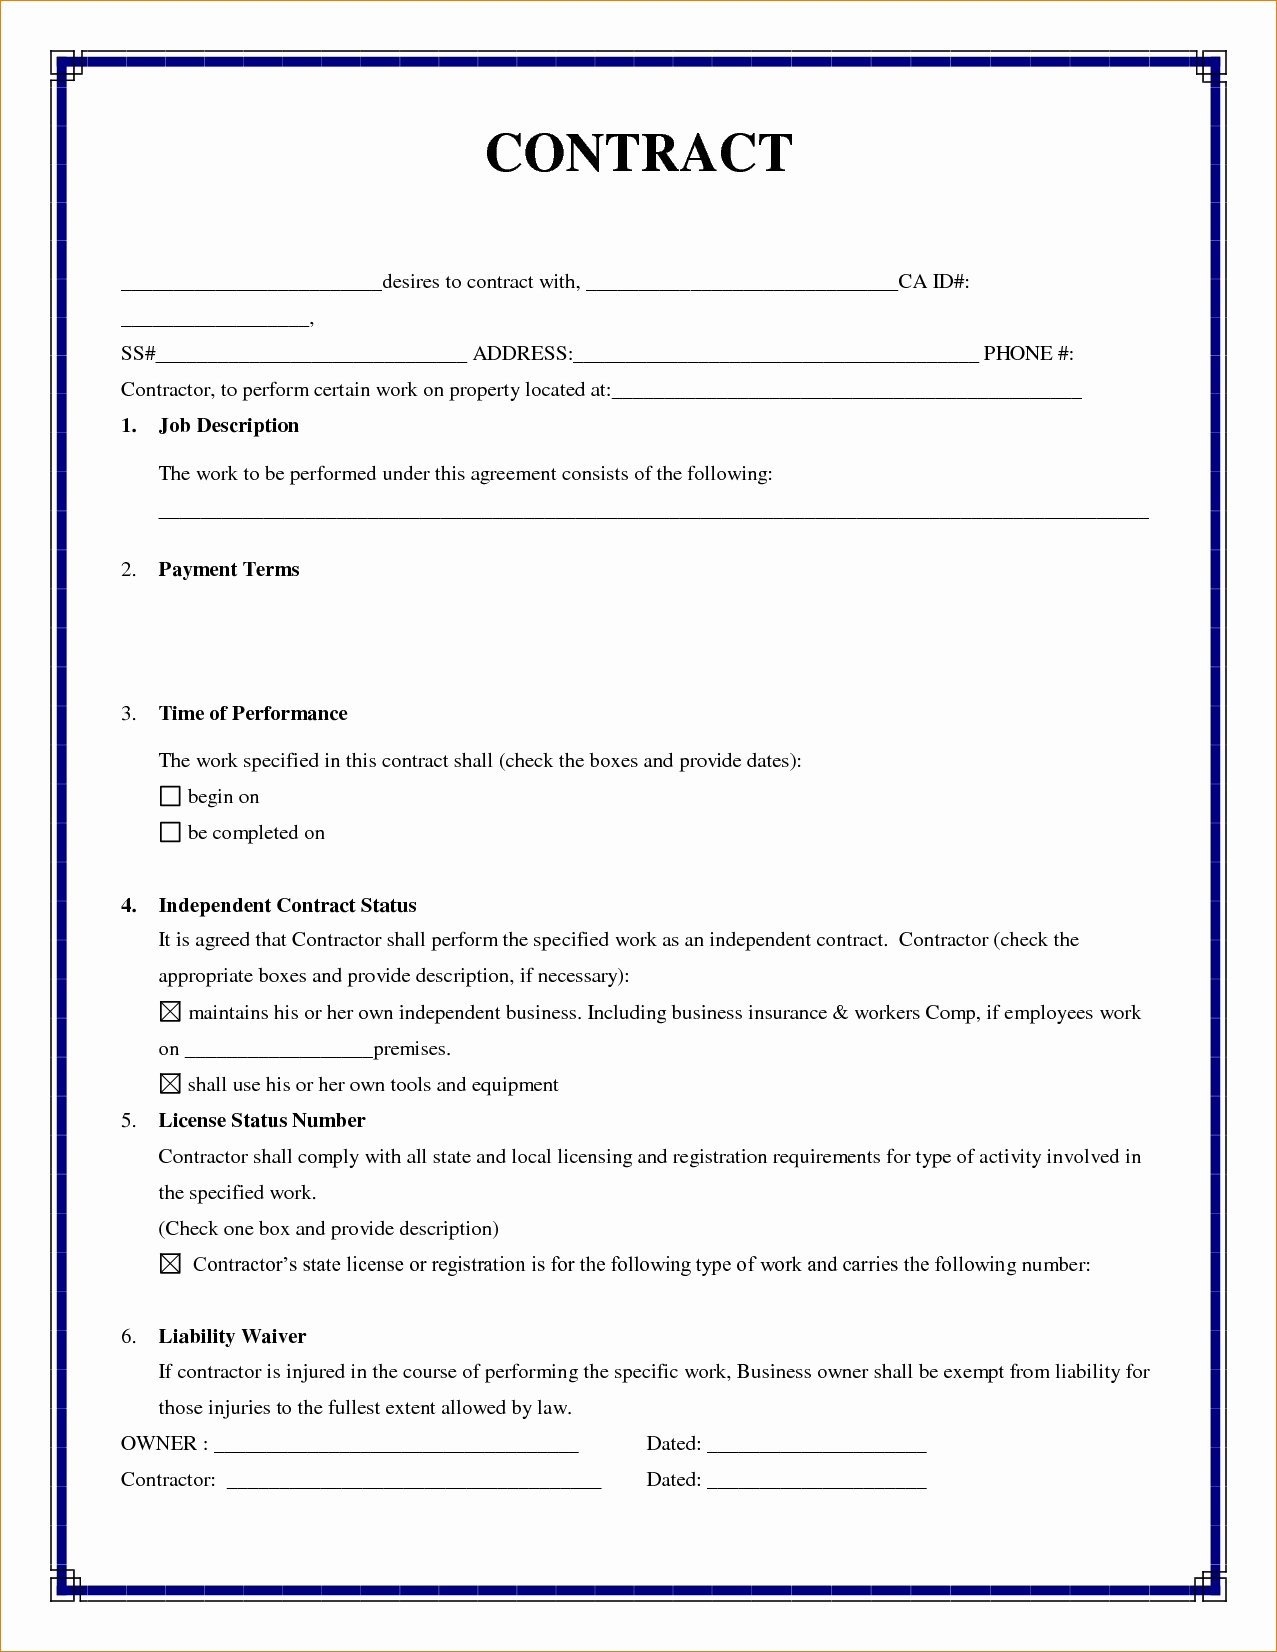 Simple Construction Contract Template Beautiful Simple Contract Agreement